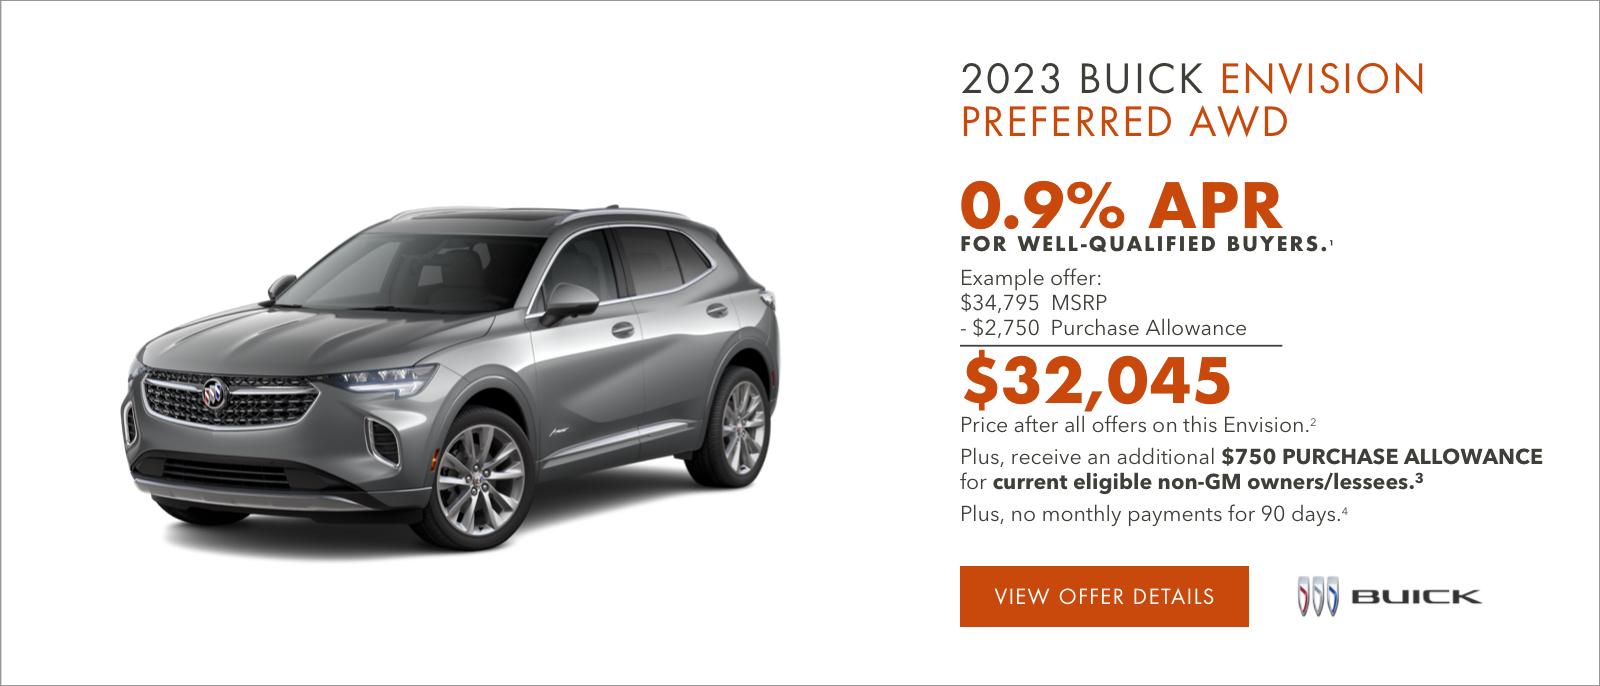 2023 Buick ENVISION Preferred AWD

0.9% APR
FOR WELL-QUALIFIED BUYERS.1

Example offer:
$34,795 MSRP
-$2,750 Purchase Allowance
$32,045 Price after all offers on this Envision.2

Plus, an additional $750 PURCHASE ALLOWANCE for current eligible non-GM owners/lessees.3

Plus, no monthly payments for 90 days.4